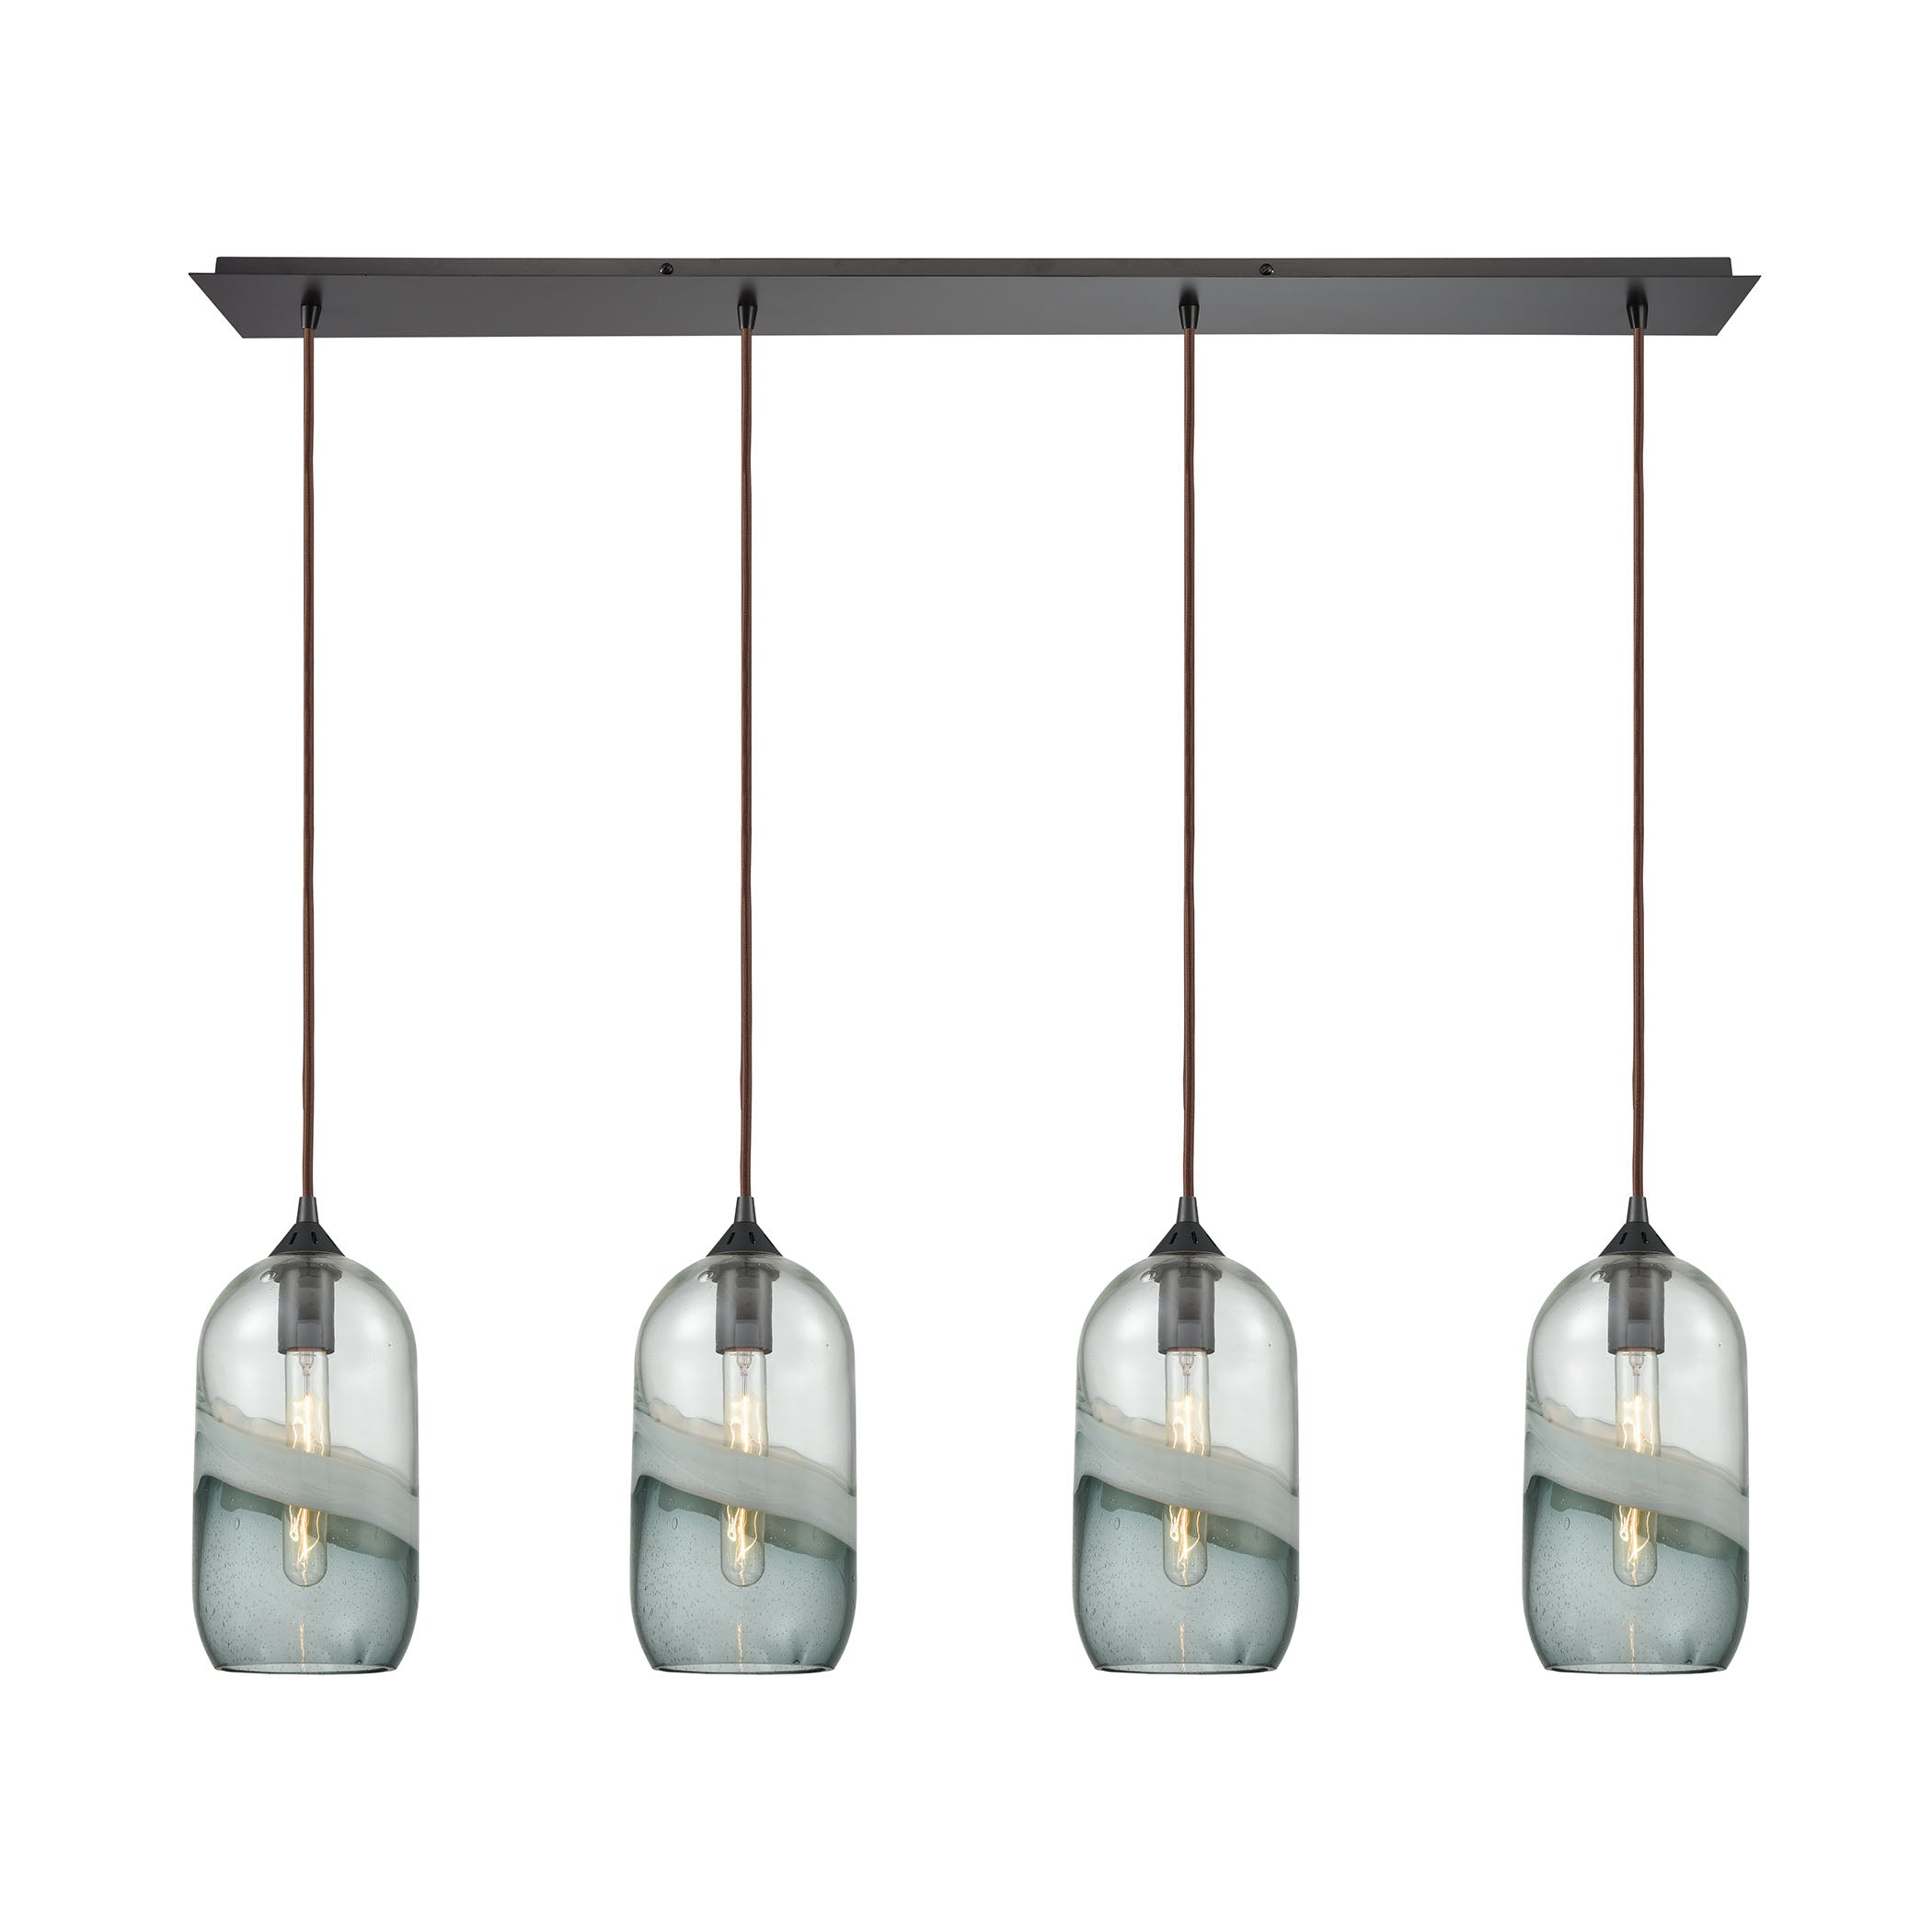 ELK Lighting 25102/4LP Sutter Creek 4-Light Linear Pendant Fixture in Oiled Bronze with Clear and Smoke Seedy Glass